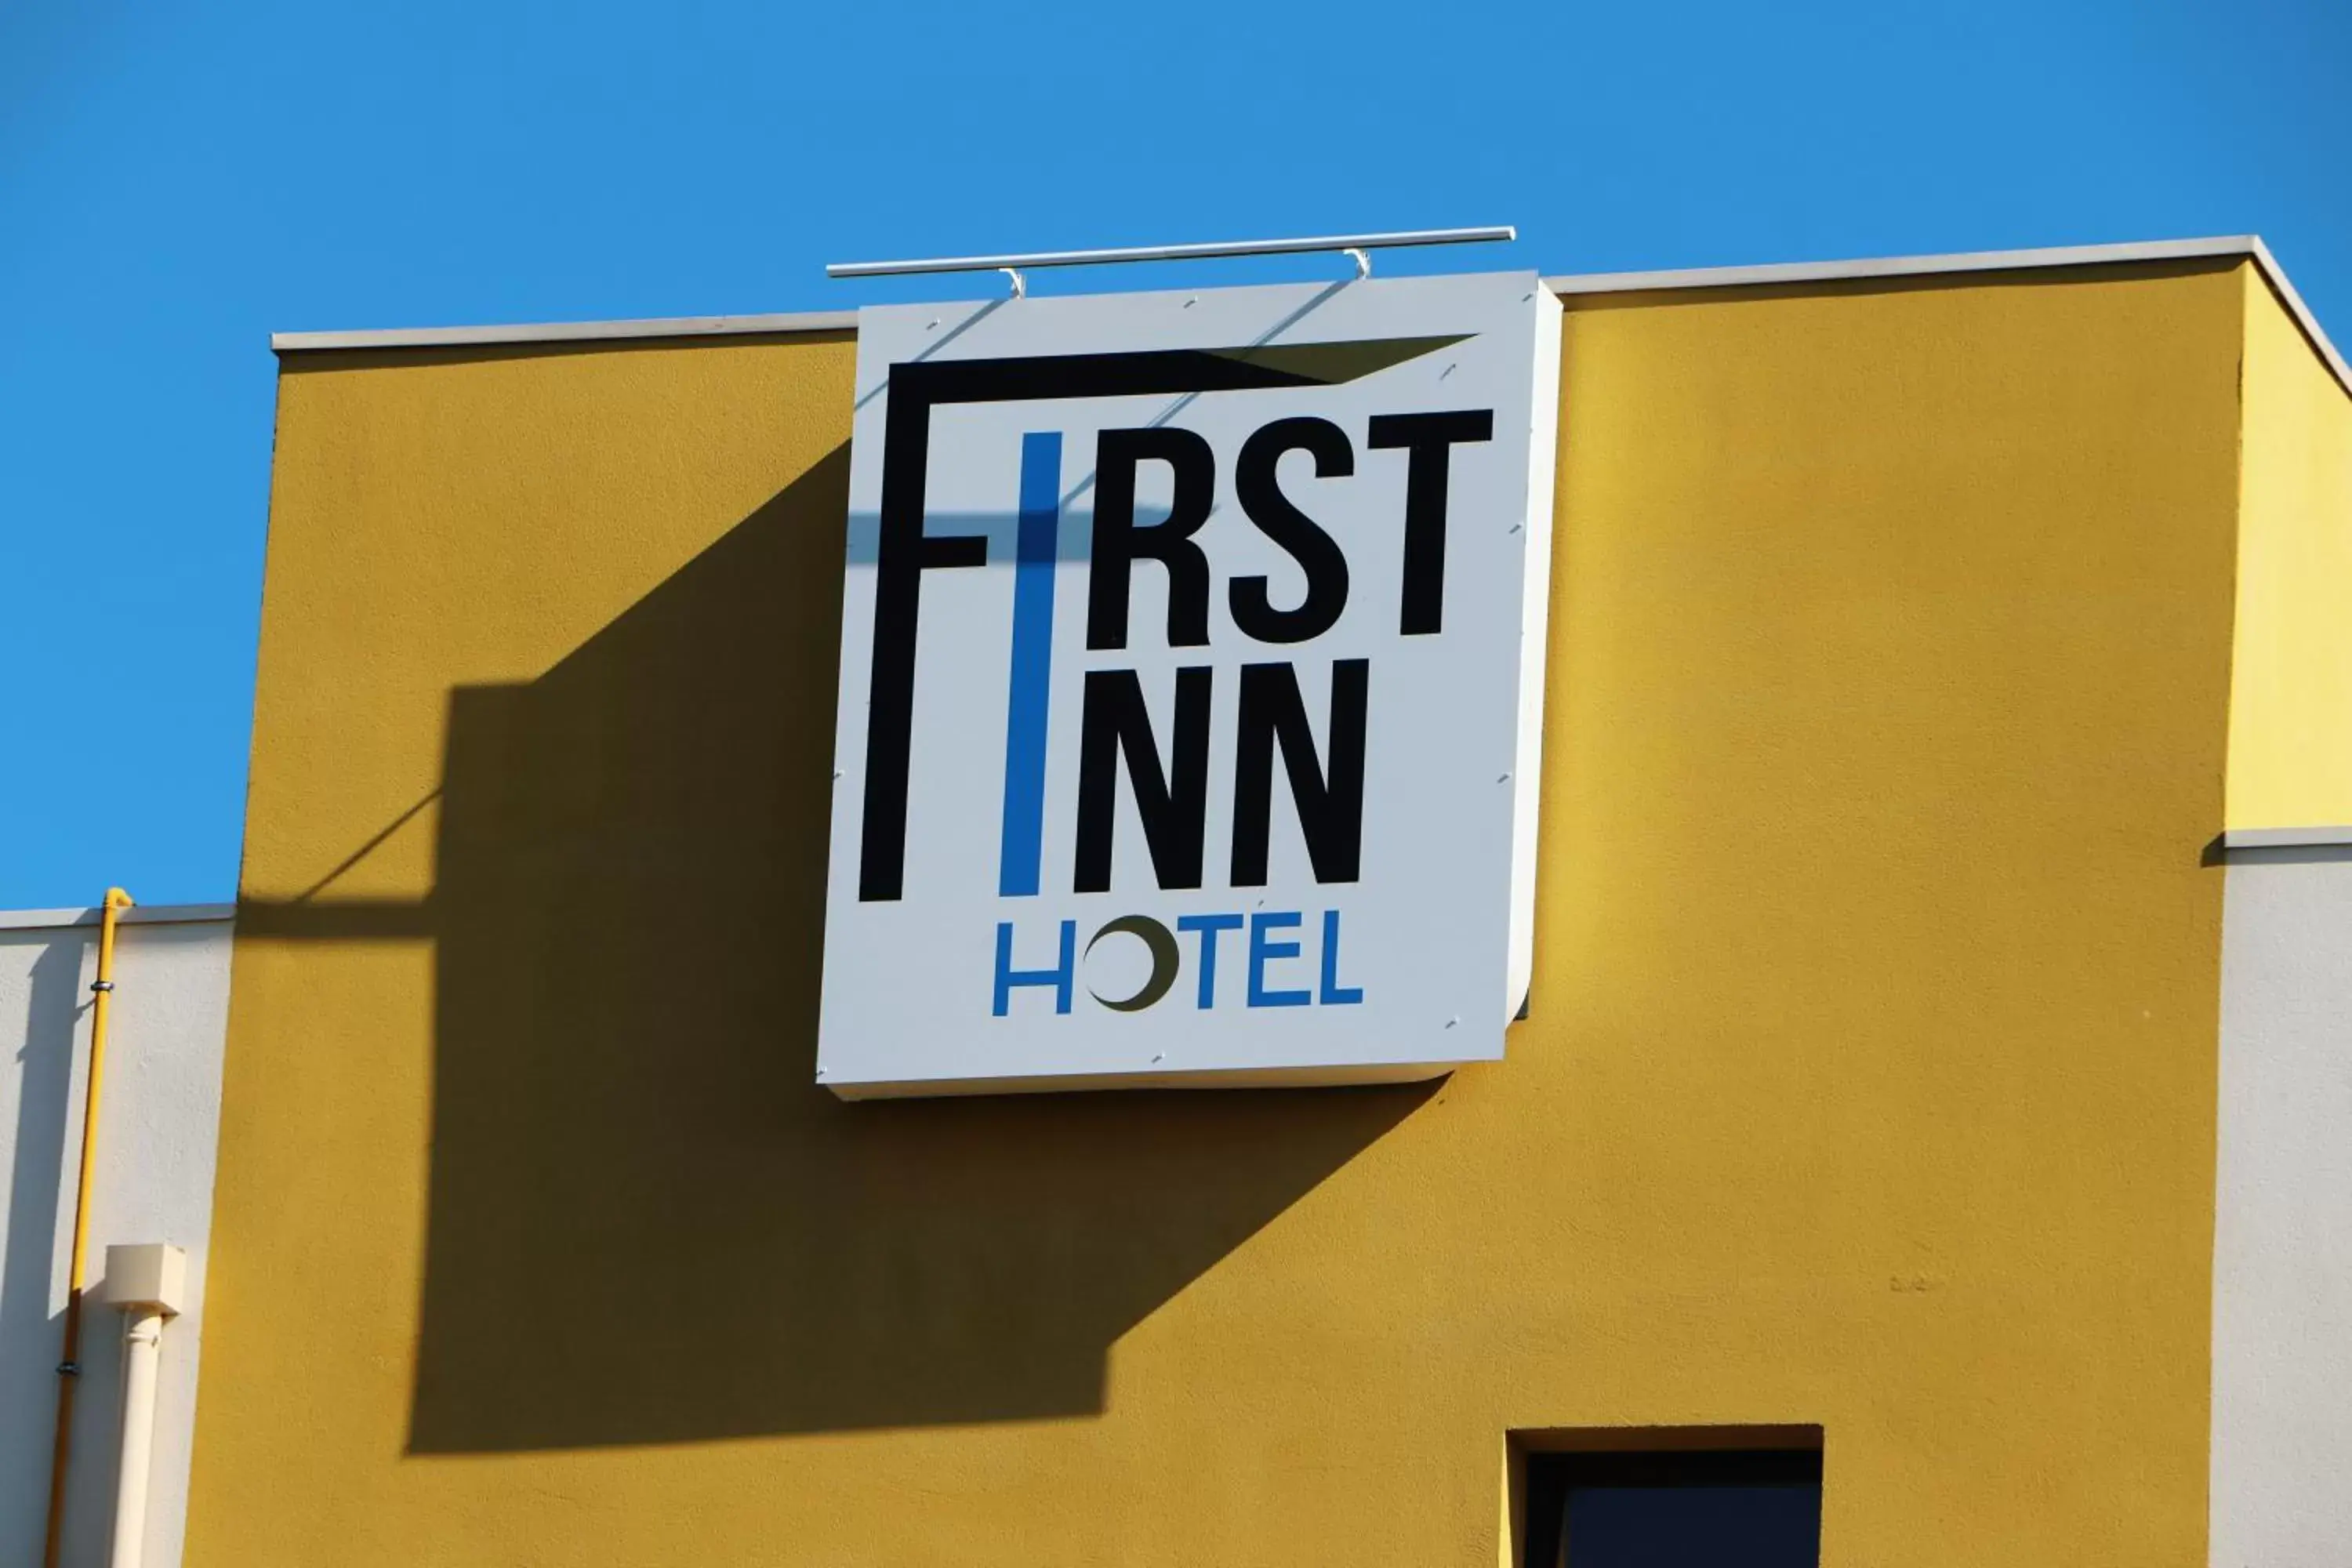 Property logo or sign in First Inn Hotel Blois